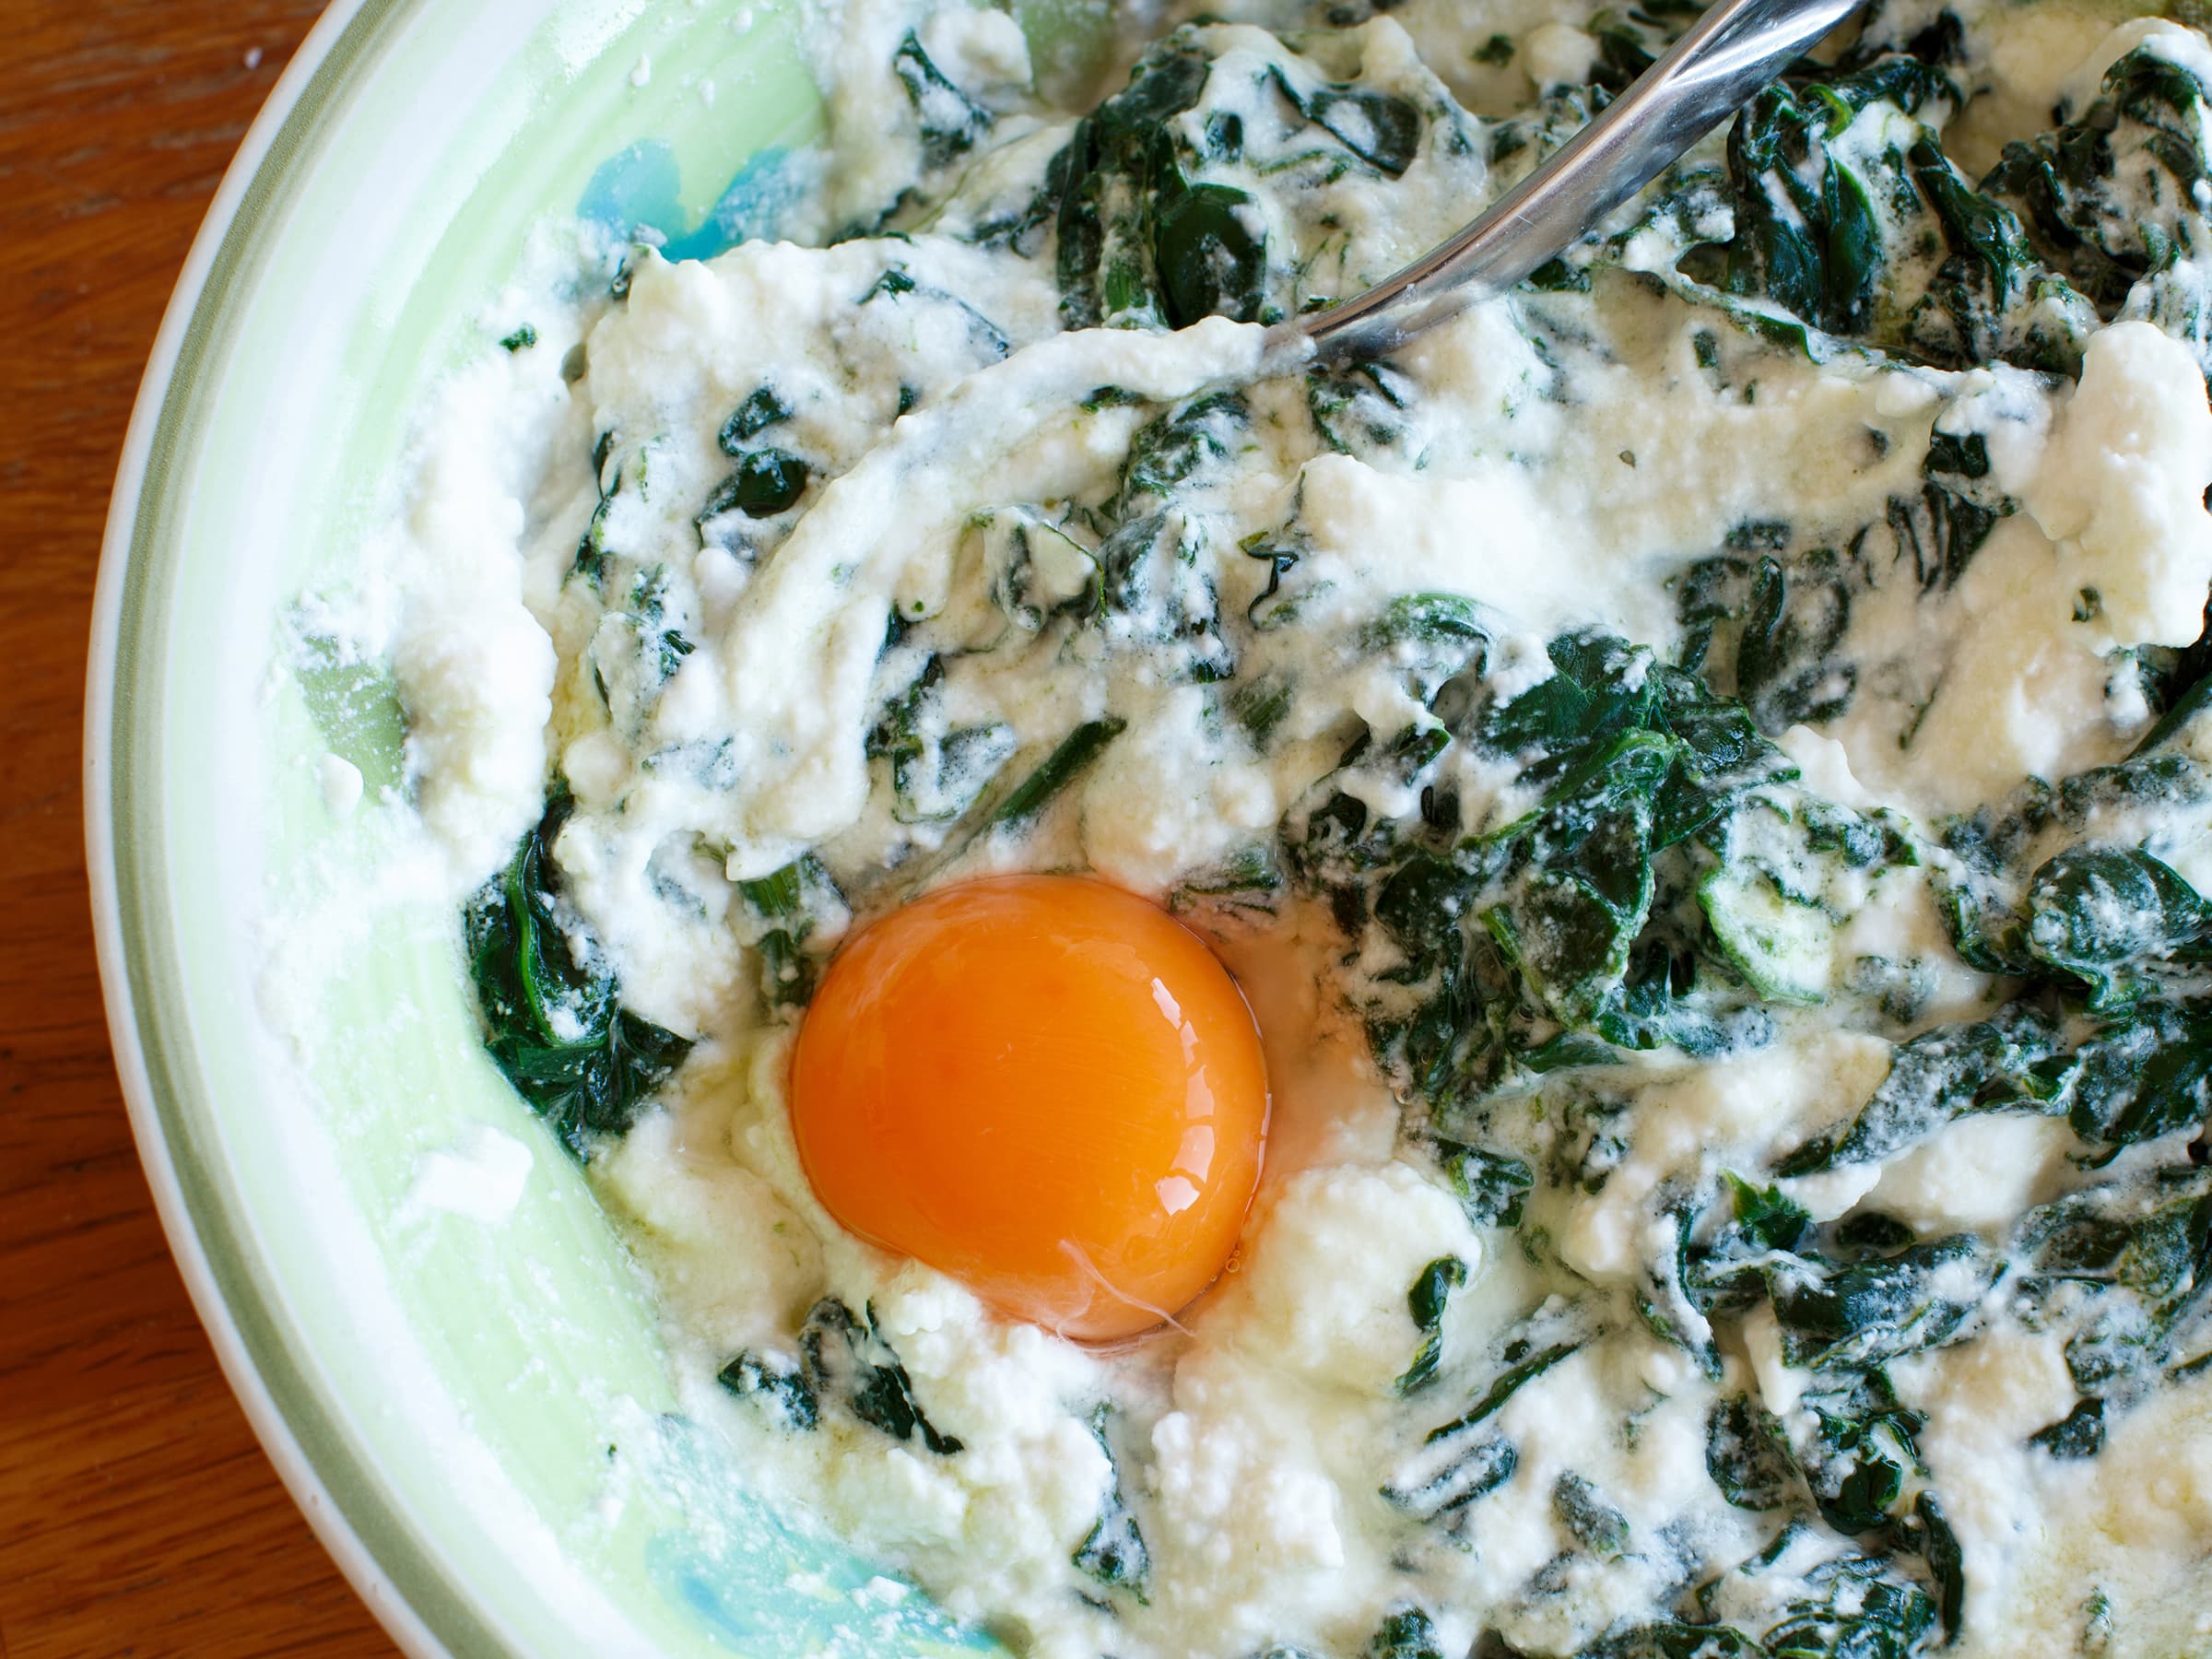 Close up image of an egg yolk in a bowl of spinach and ricotta.